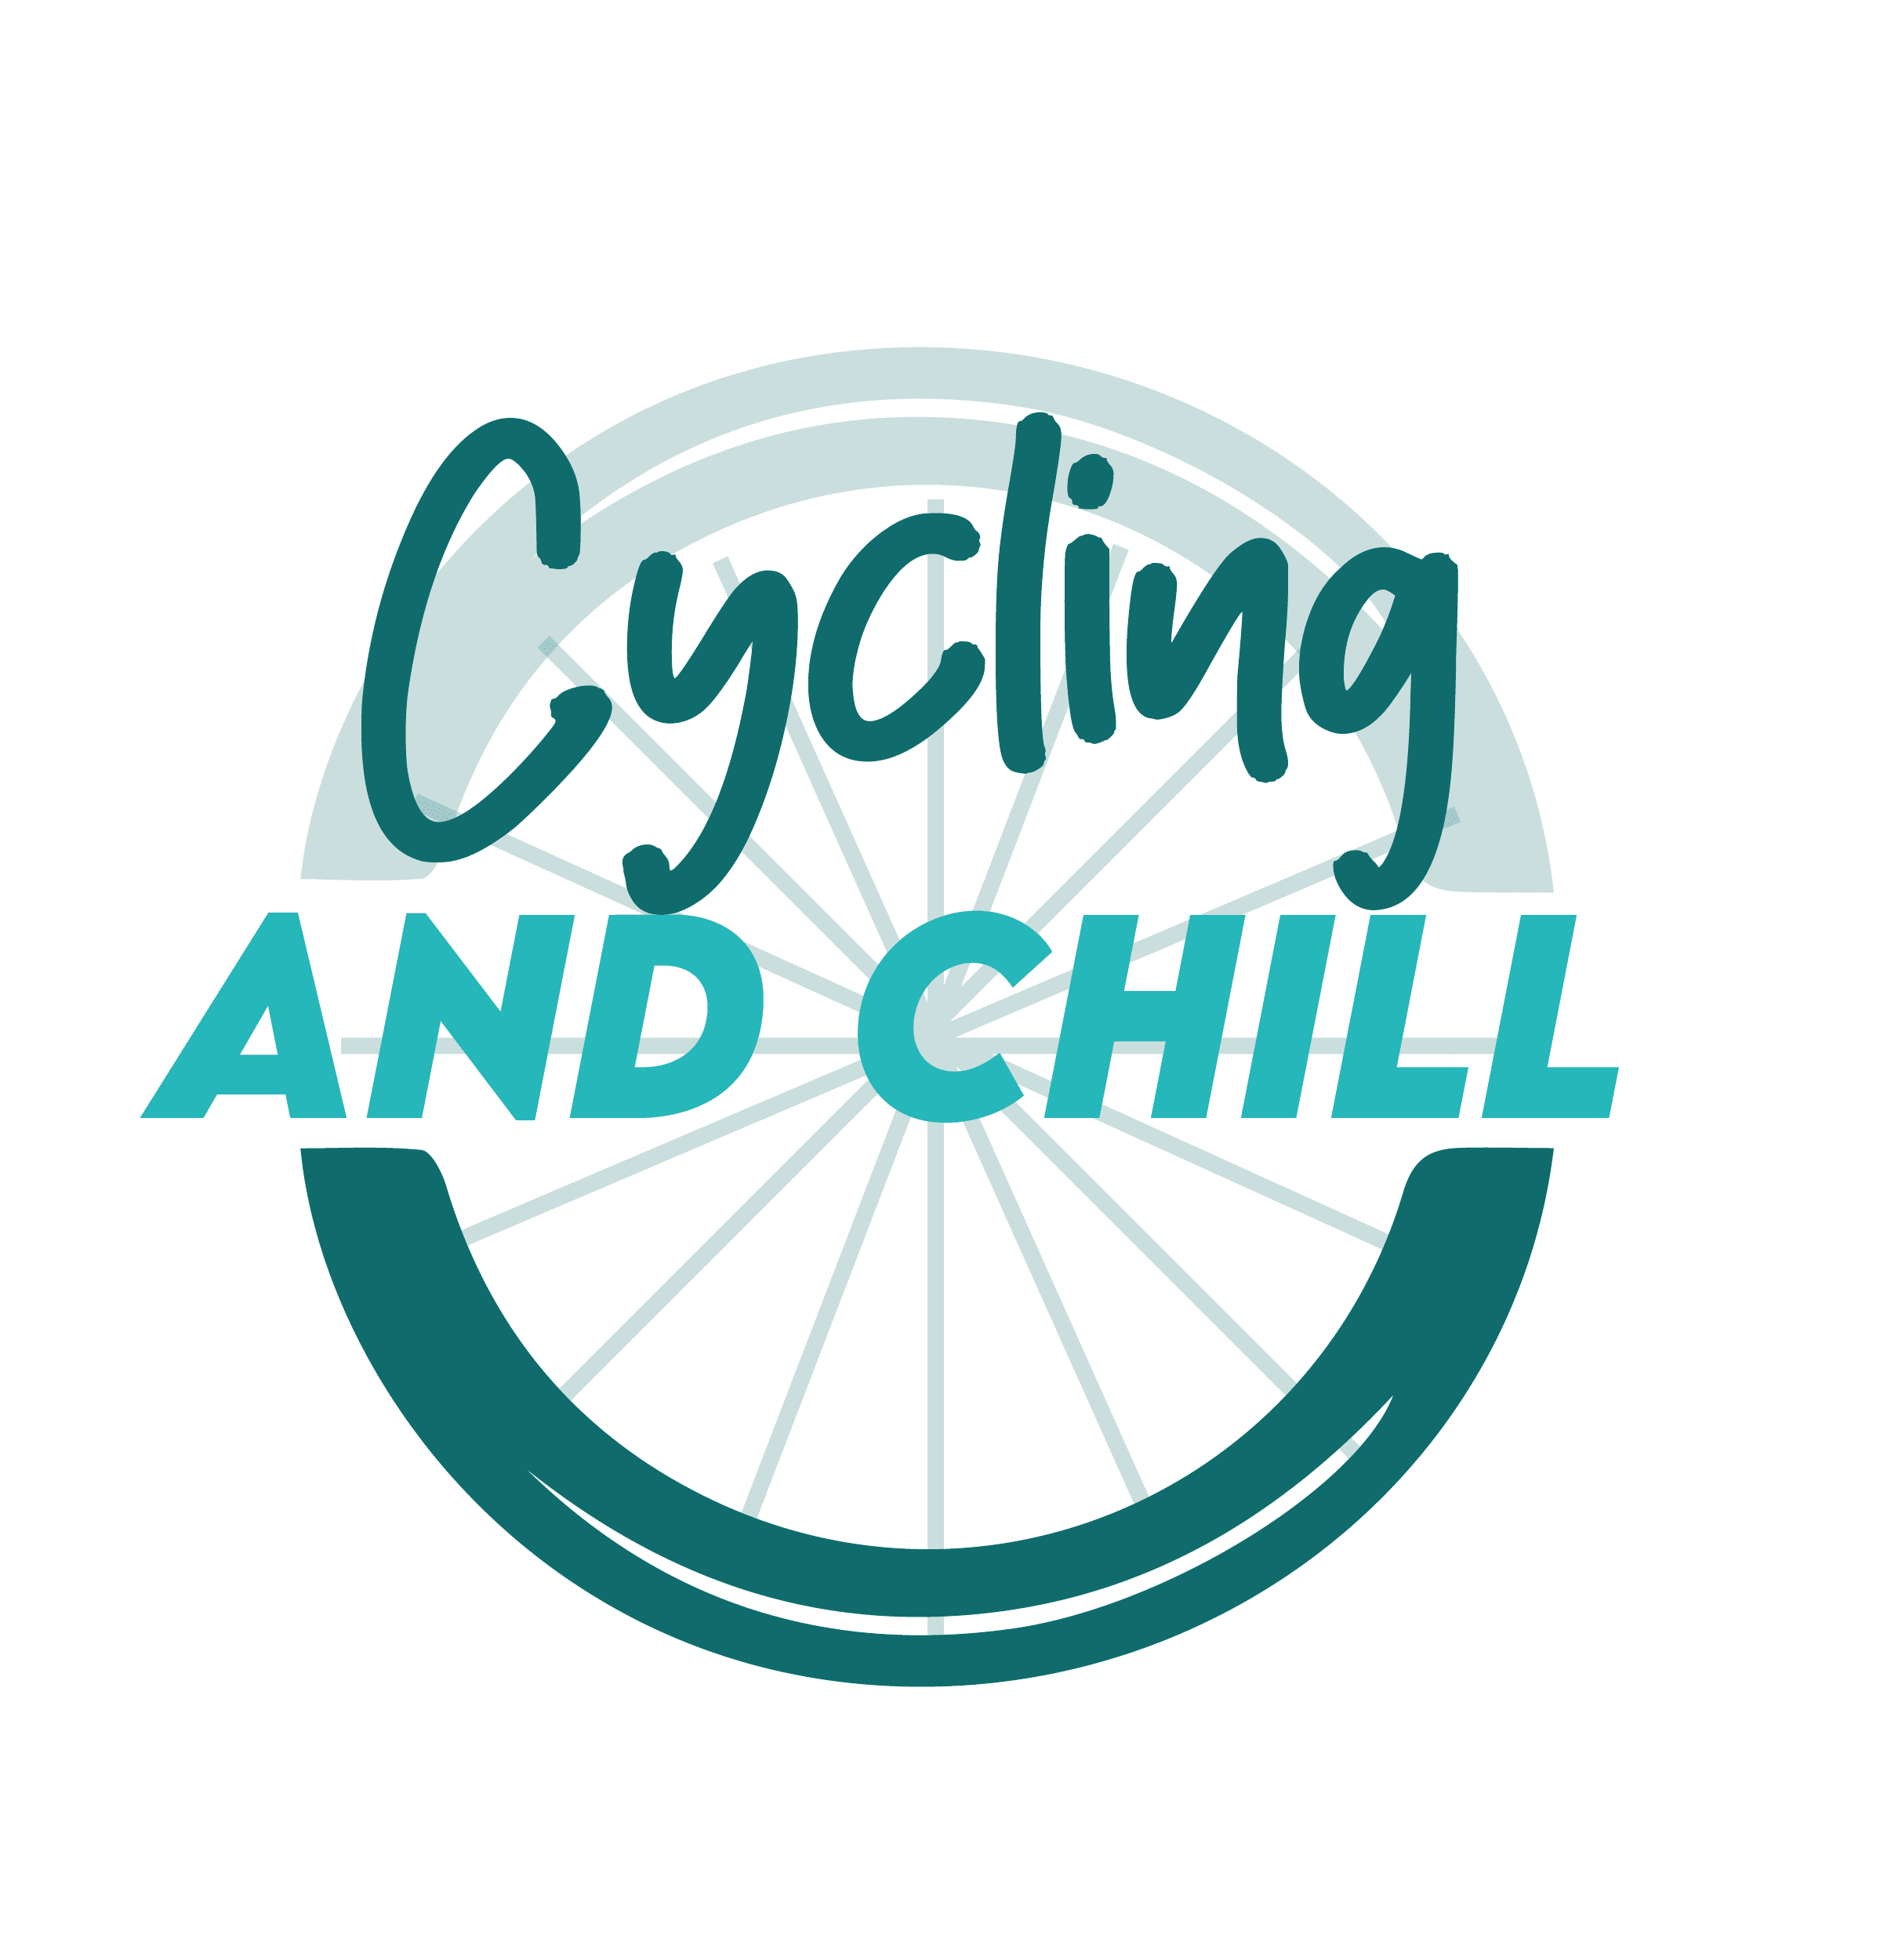 Cycling and chill logo